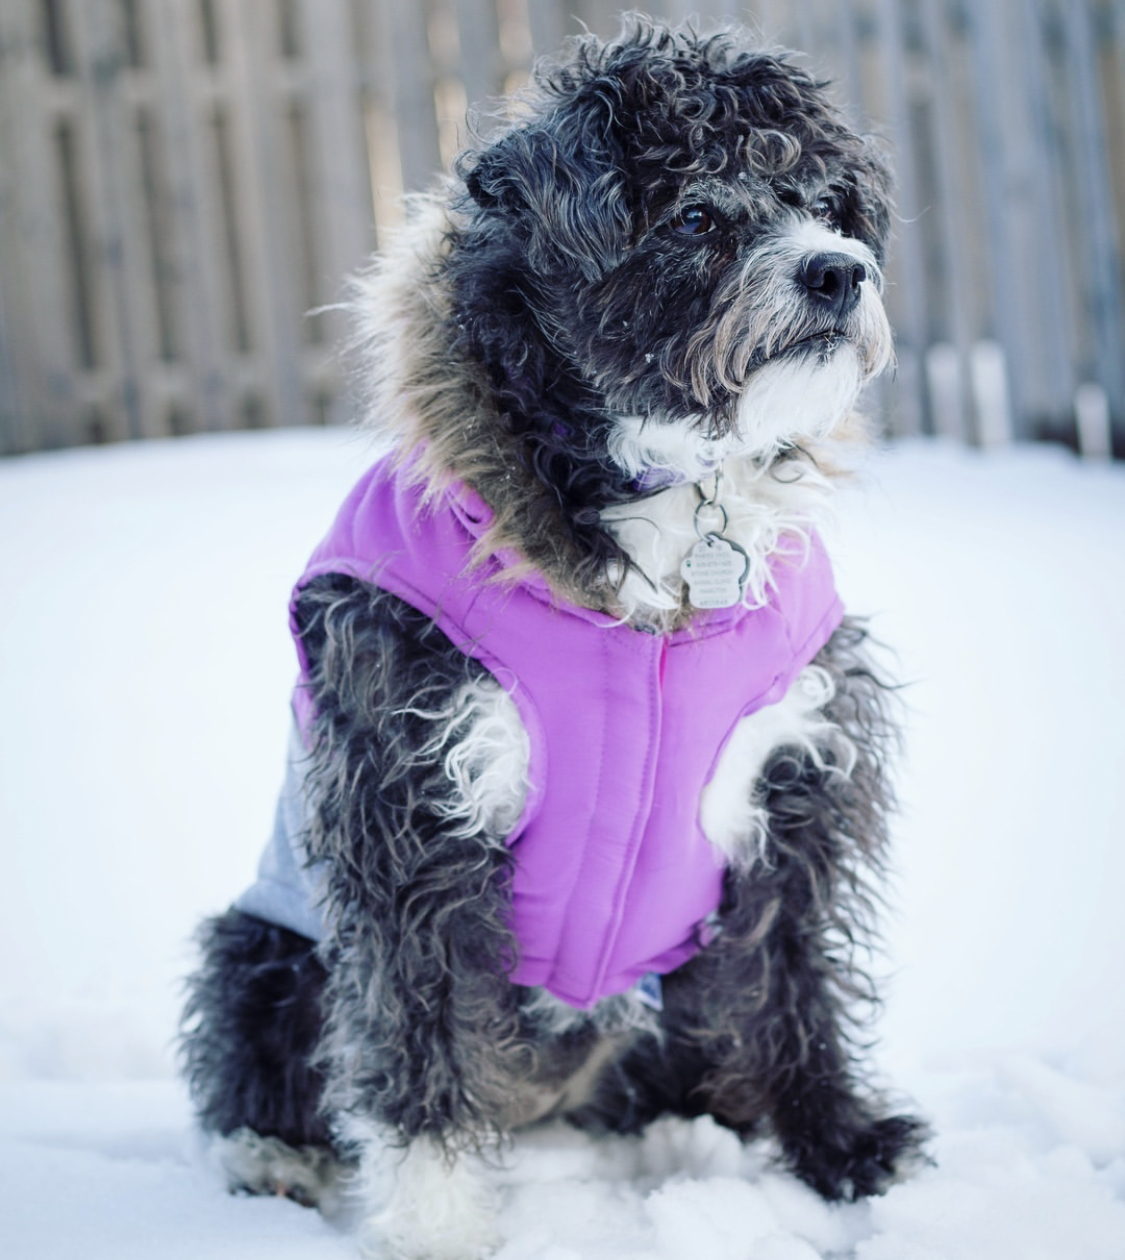 A Boston Poodle sitting in snow outdoors